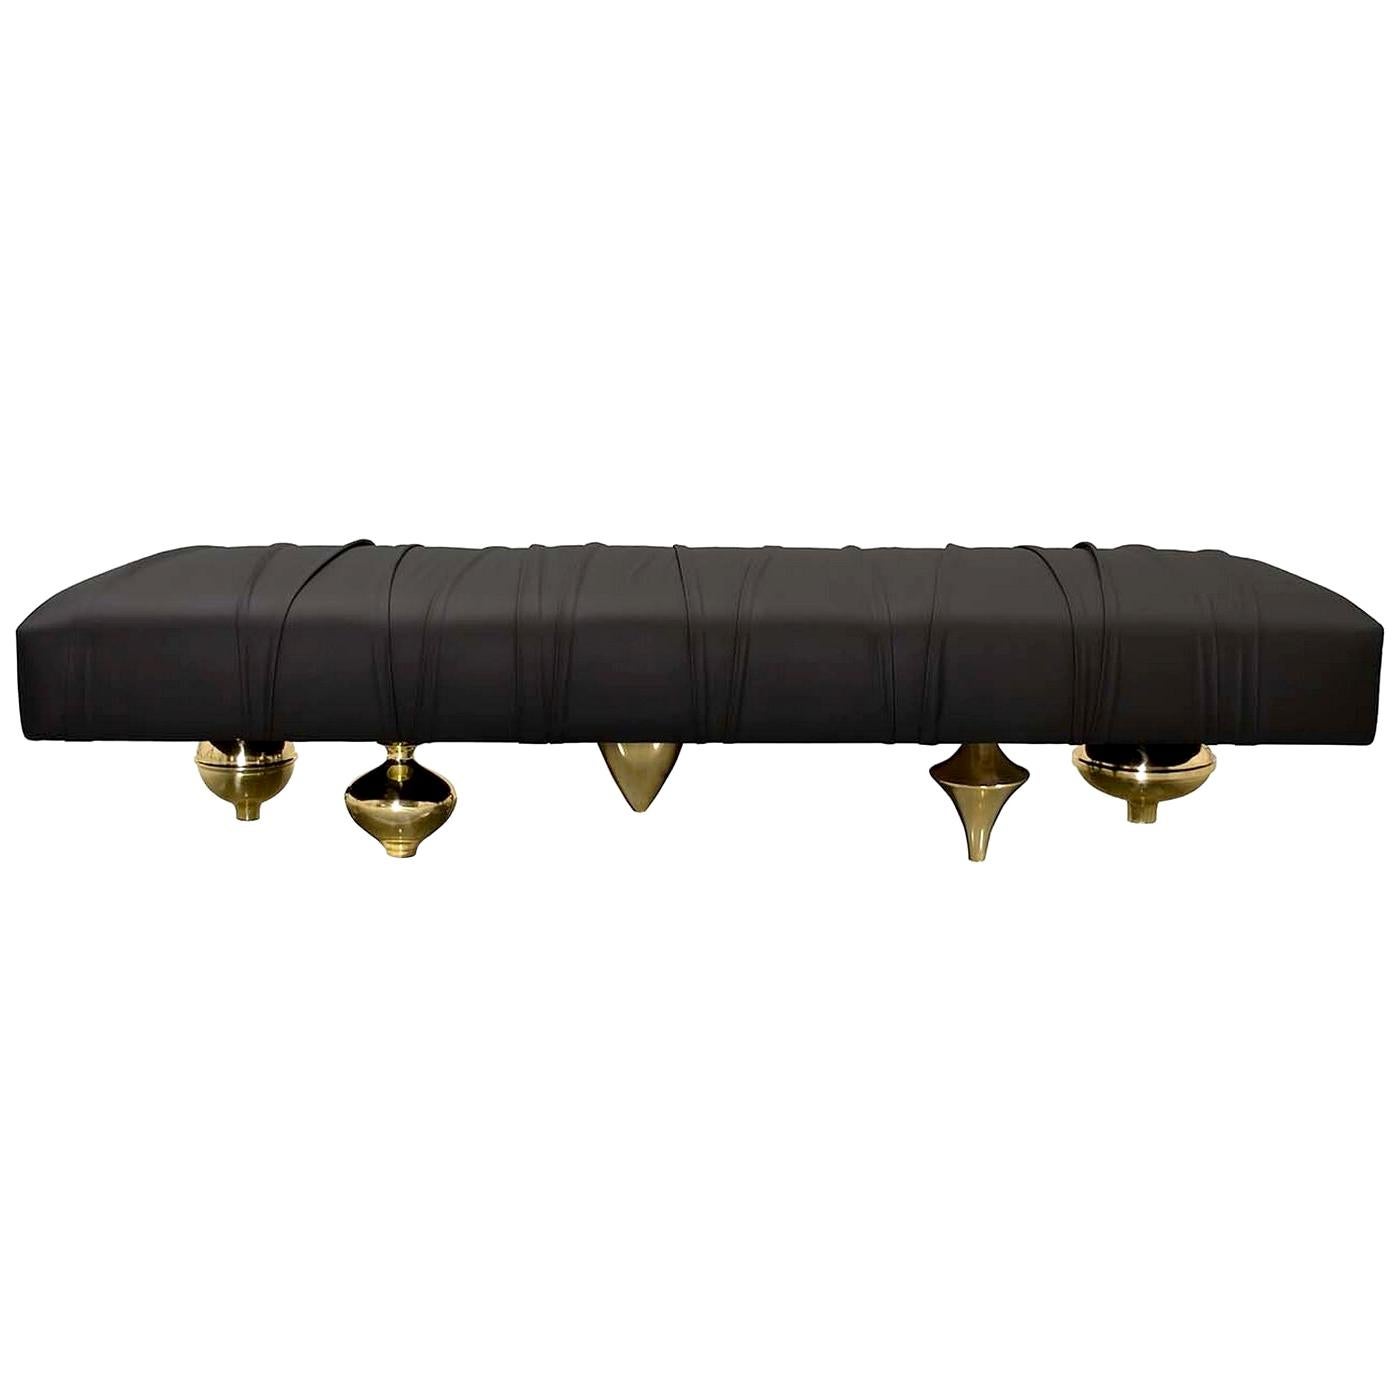 Black Upholstered Leather Bench with Gold Finish Brass Legs, Made in Italy